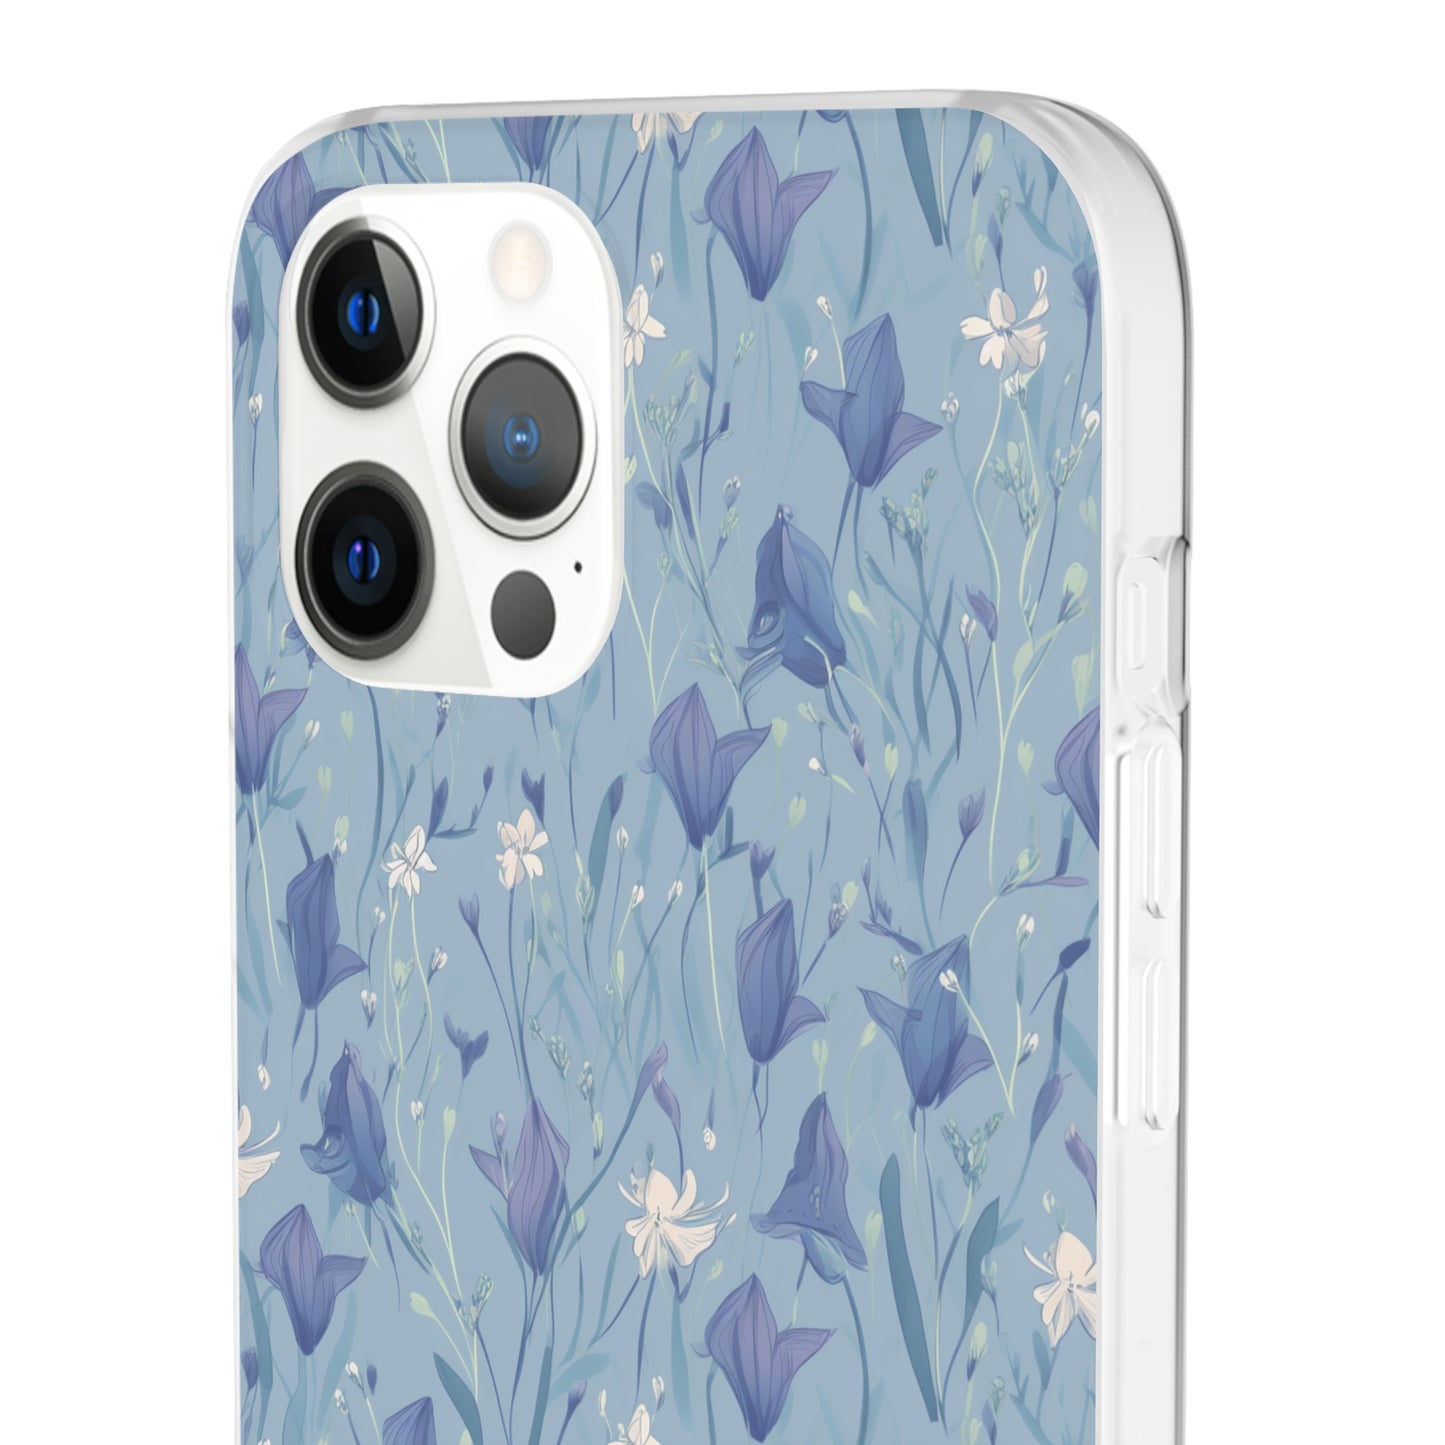 Enchanting Bluebell Harmony Phone Case - Captivating Floral Design - Spring Collection - Flexi Cases Phone Case Pattern Symphony   